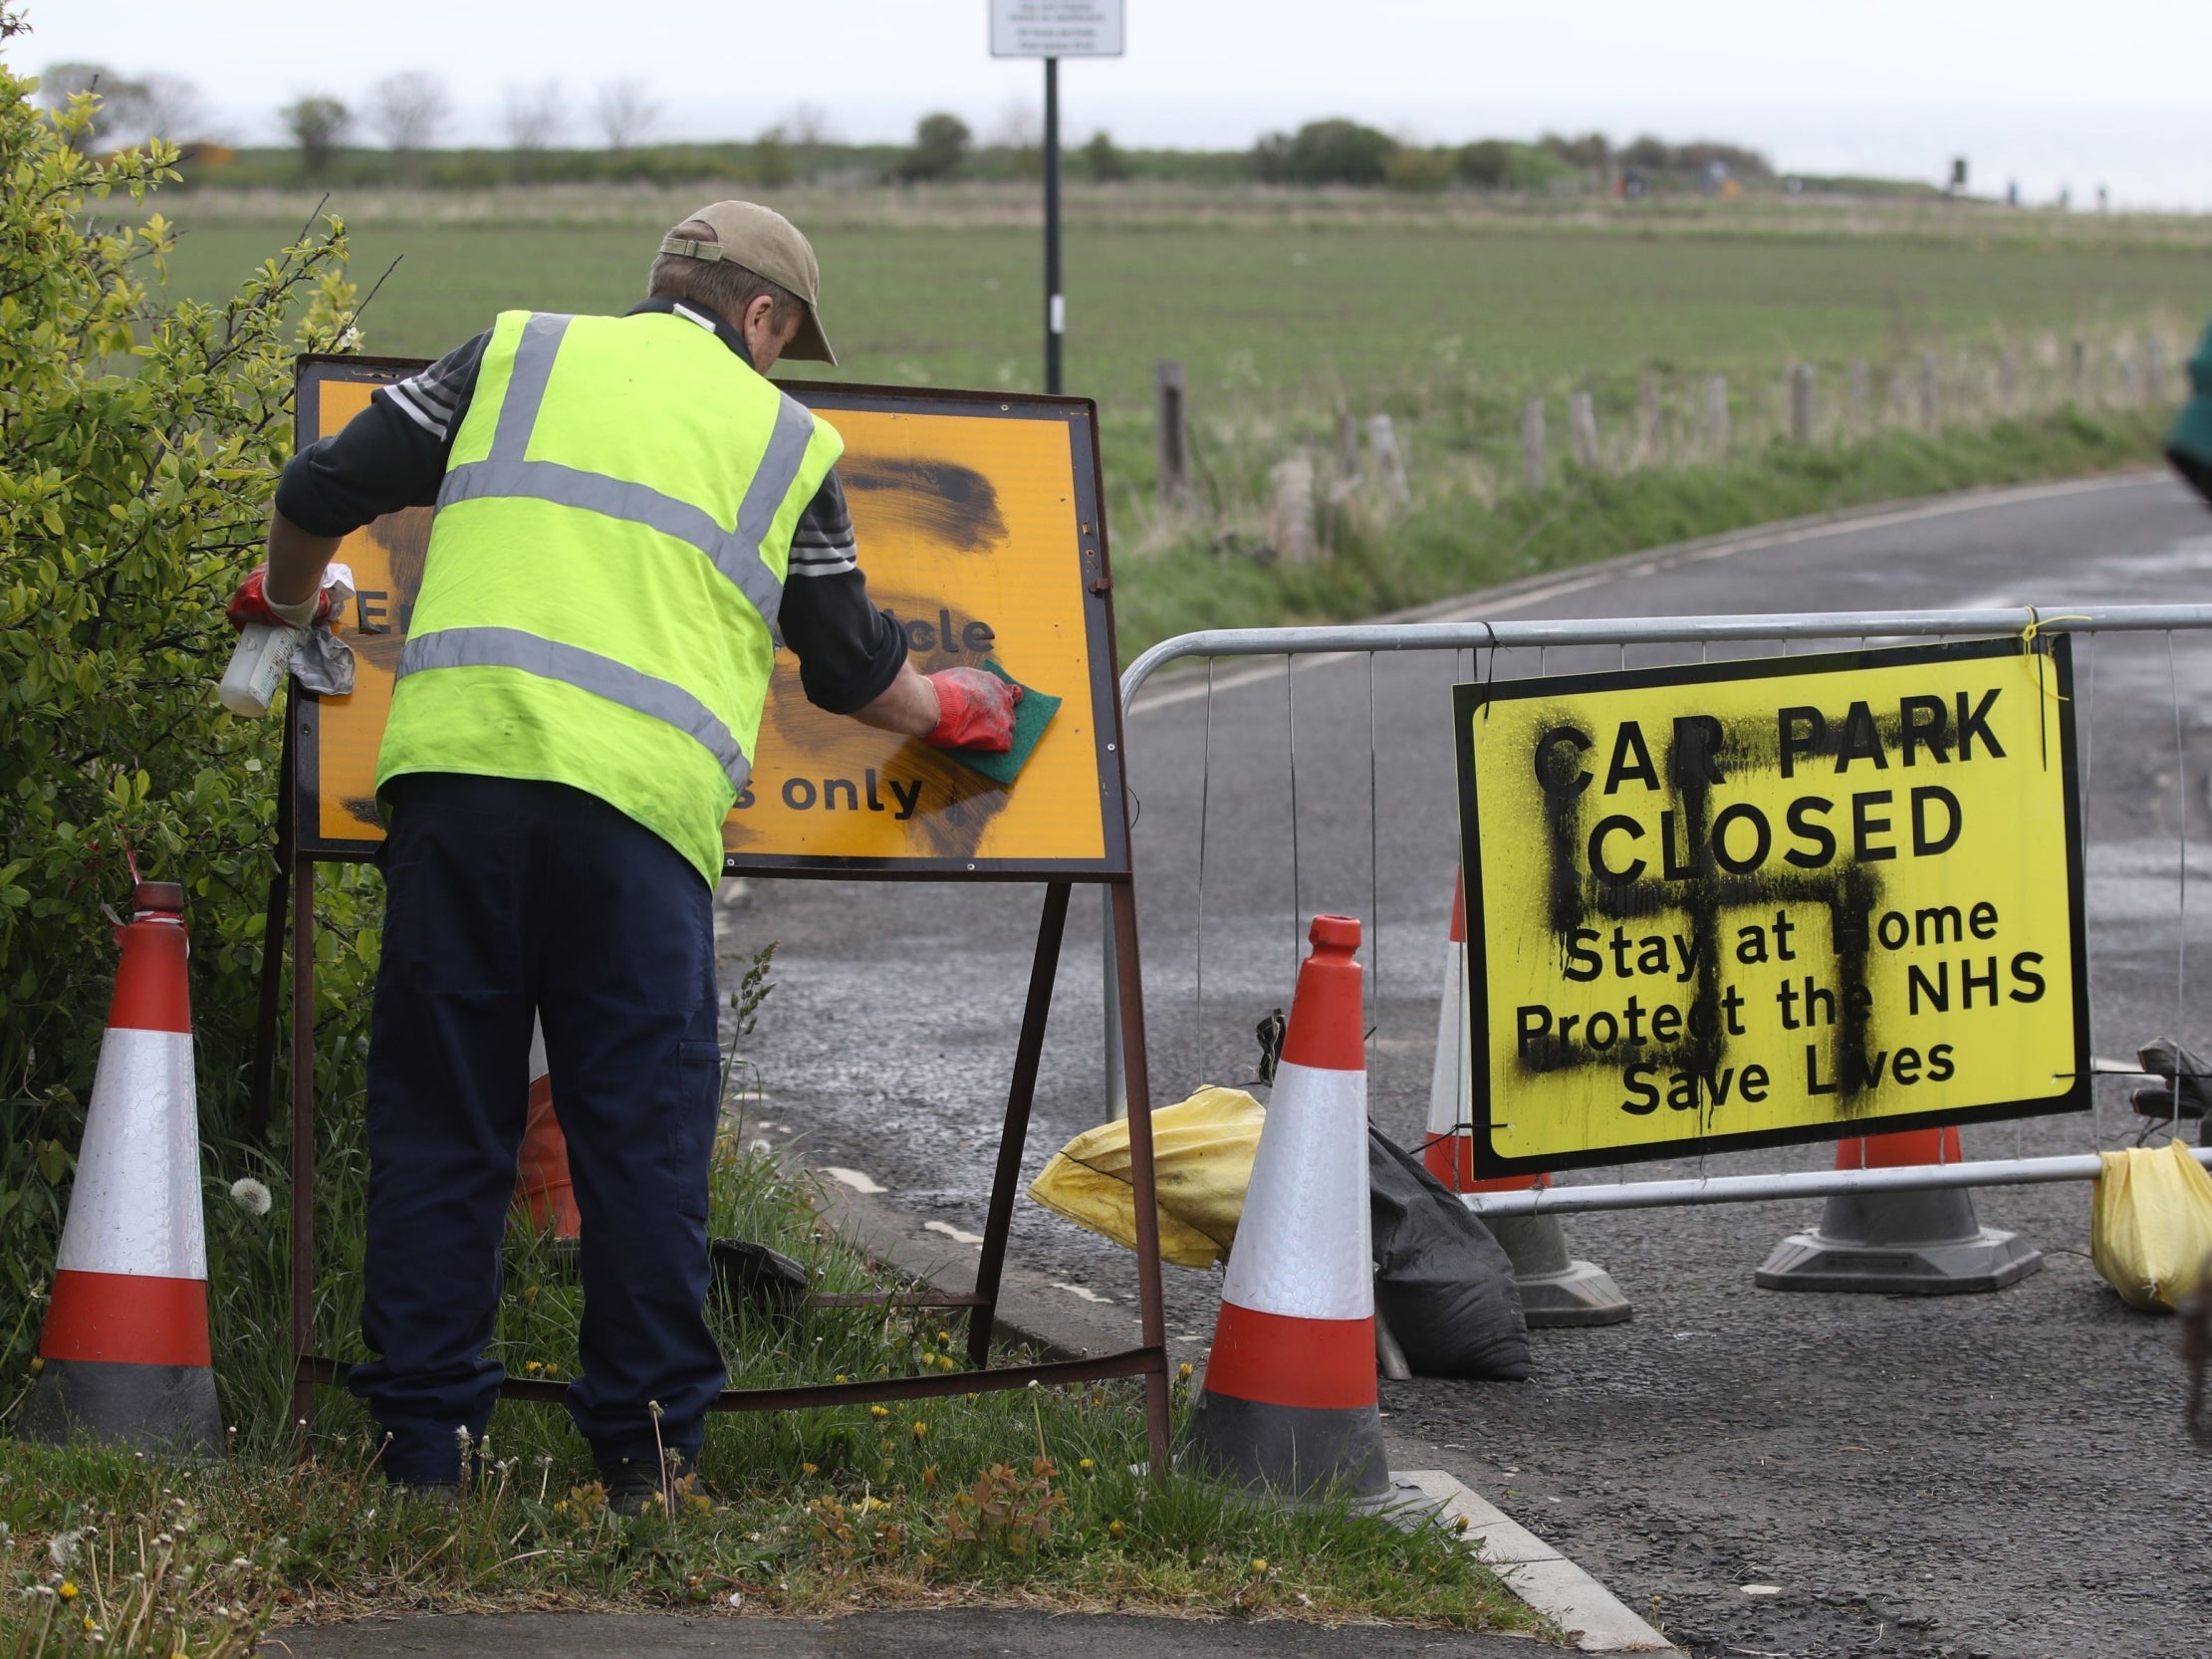 A worker removes a swastika spray painted on a sign at the entrance to a closed road and car park near Whitley Bay lighthouse, North Tyneside, 30 April 2020.